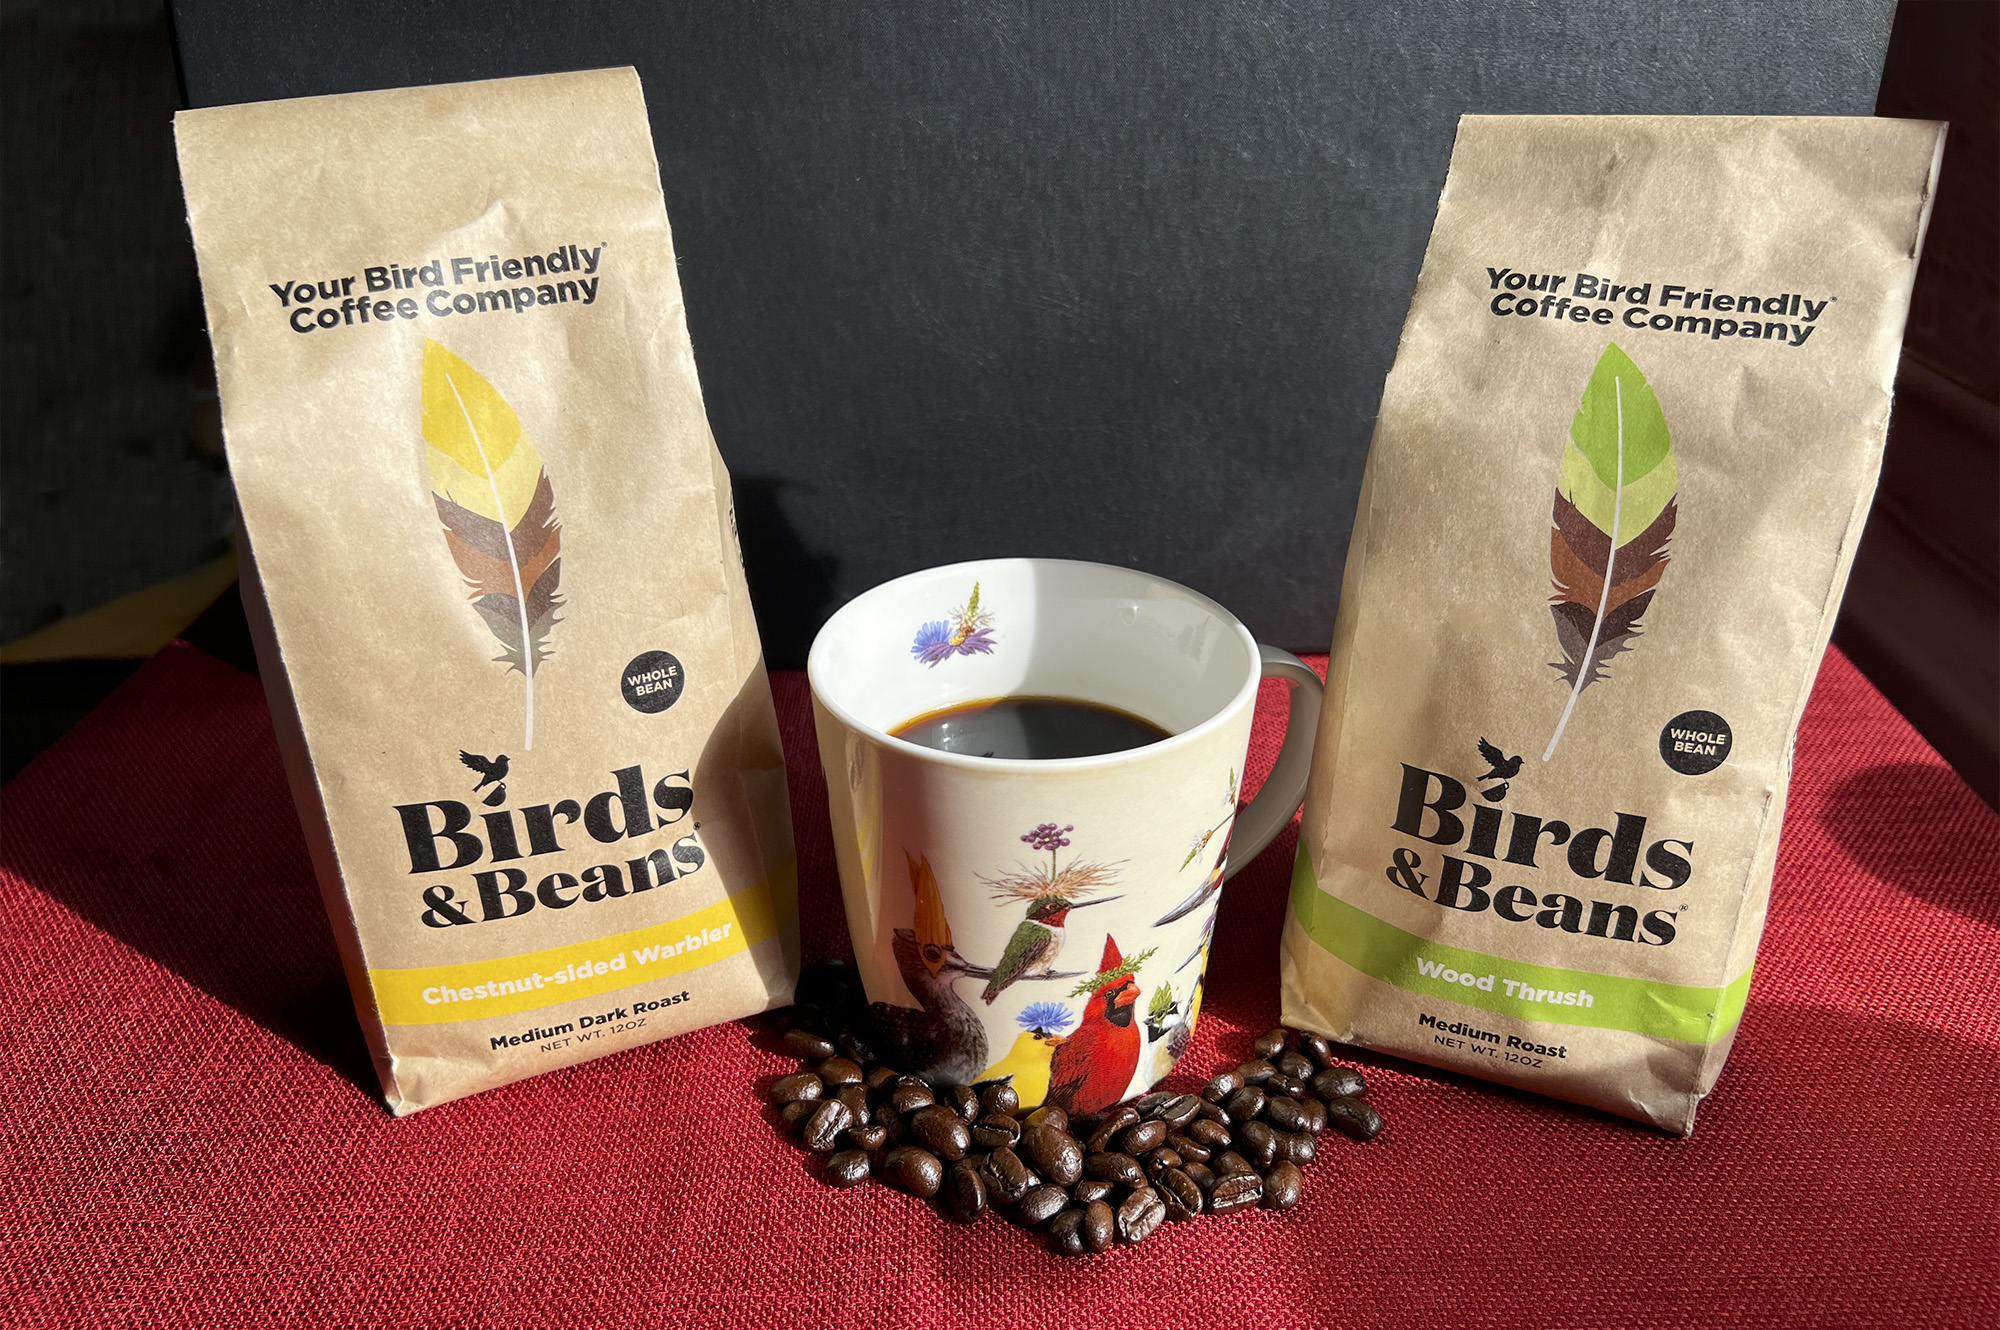 A photo of shade grown coffee by Birds and Beans